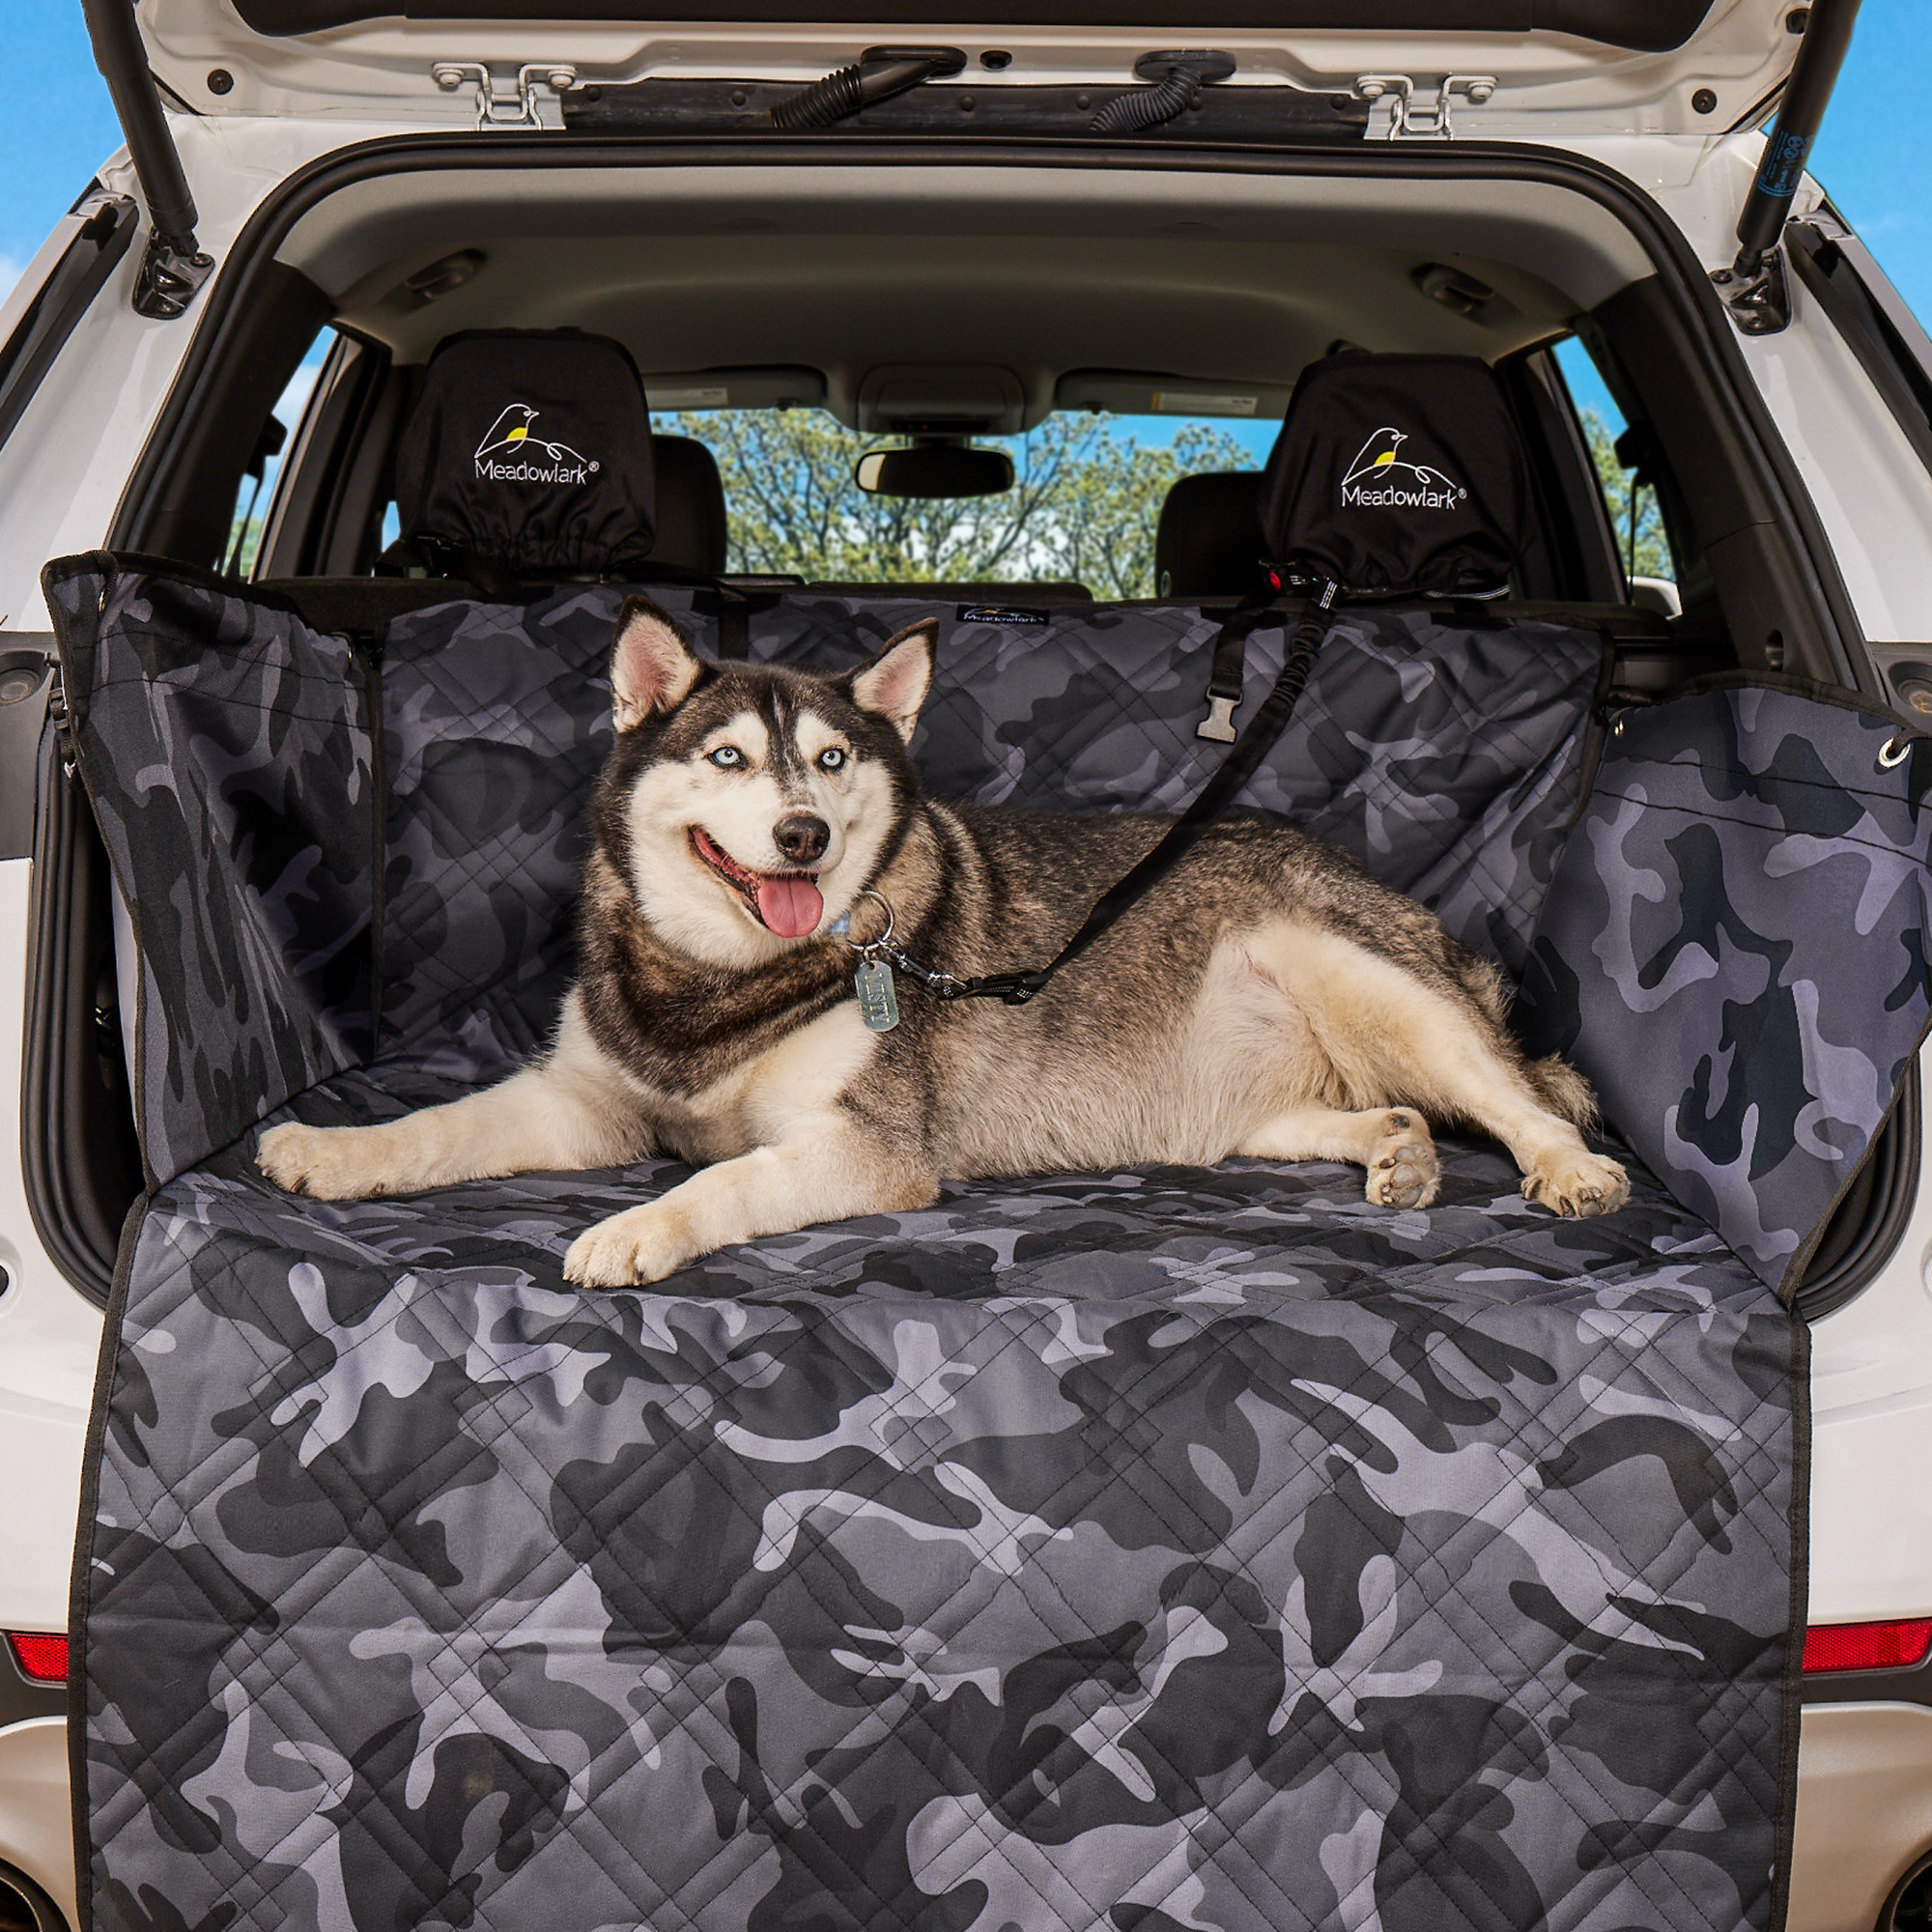 Take Your Furry Friend Anywhere With This Waterproof, Large